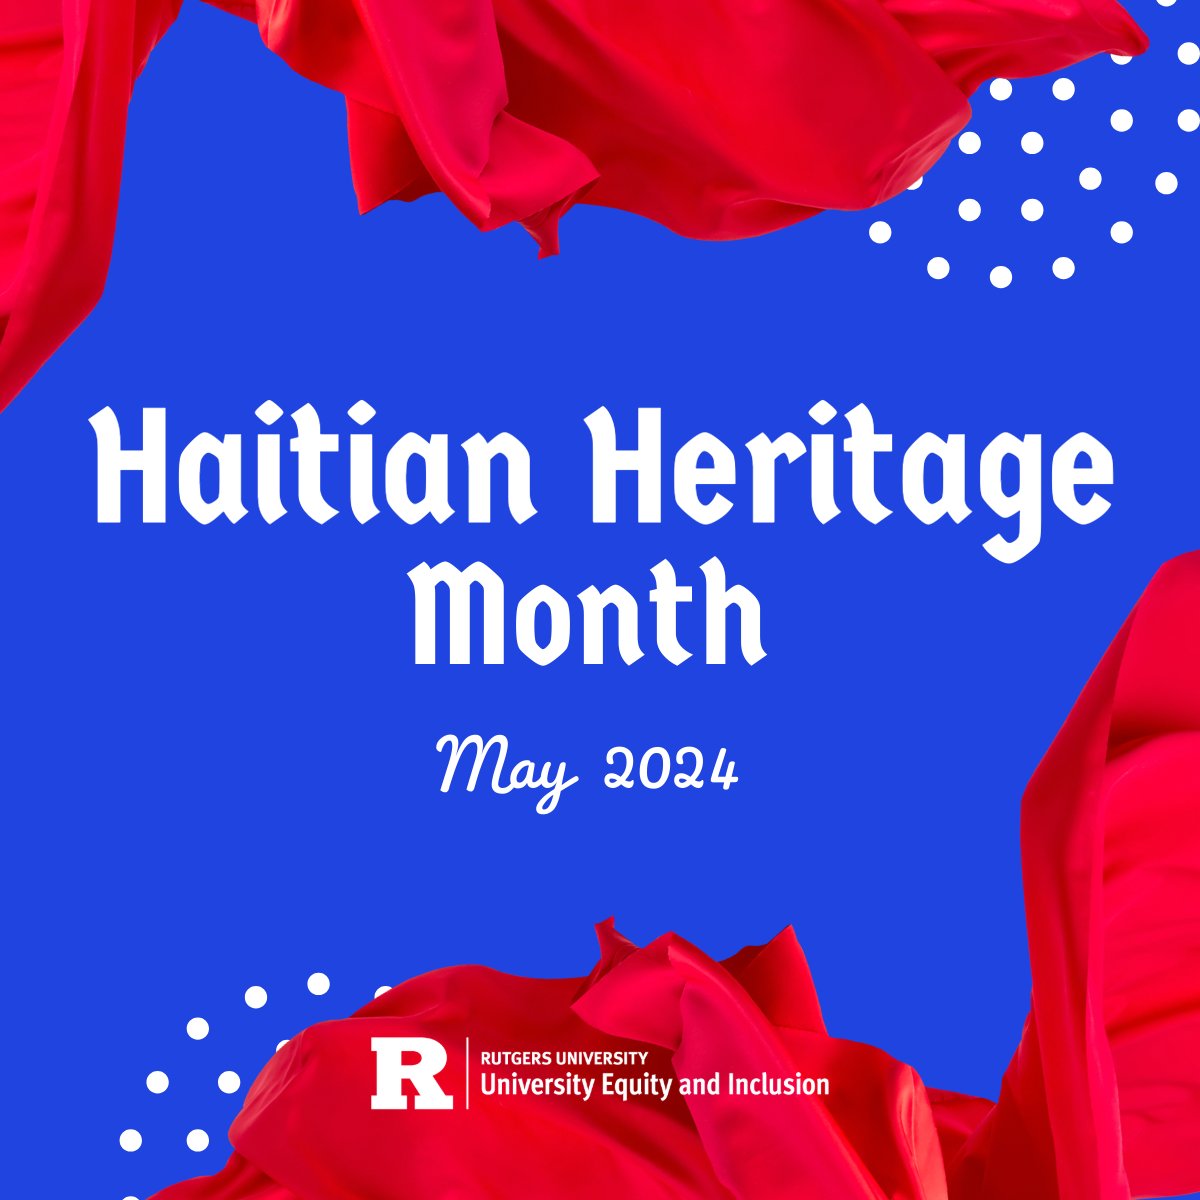 May is Haitian Heritage Month! 🇭🇹 The month-long celebration stems from Haitian Flag Day on May 18, which honors the creation and adoption of the flag during the Haitian Revolution in 1803.